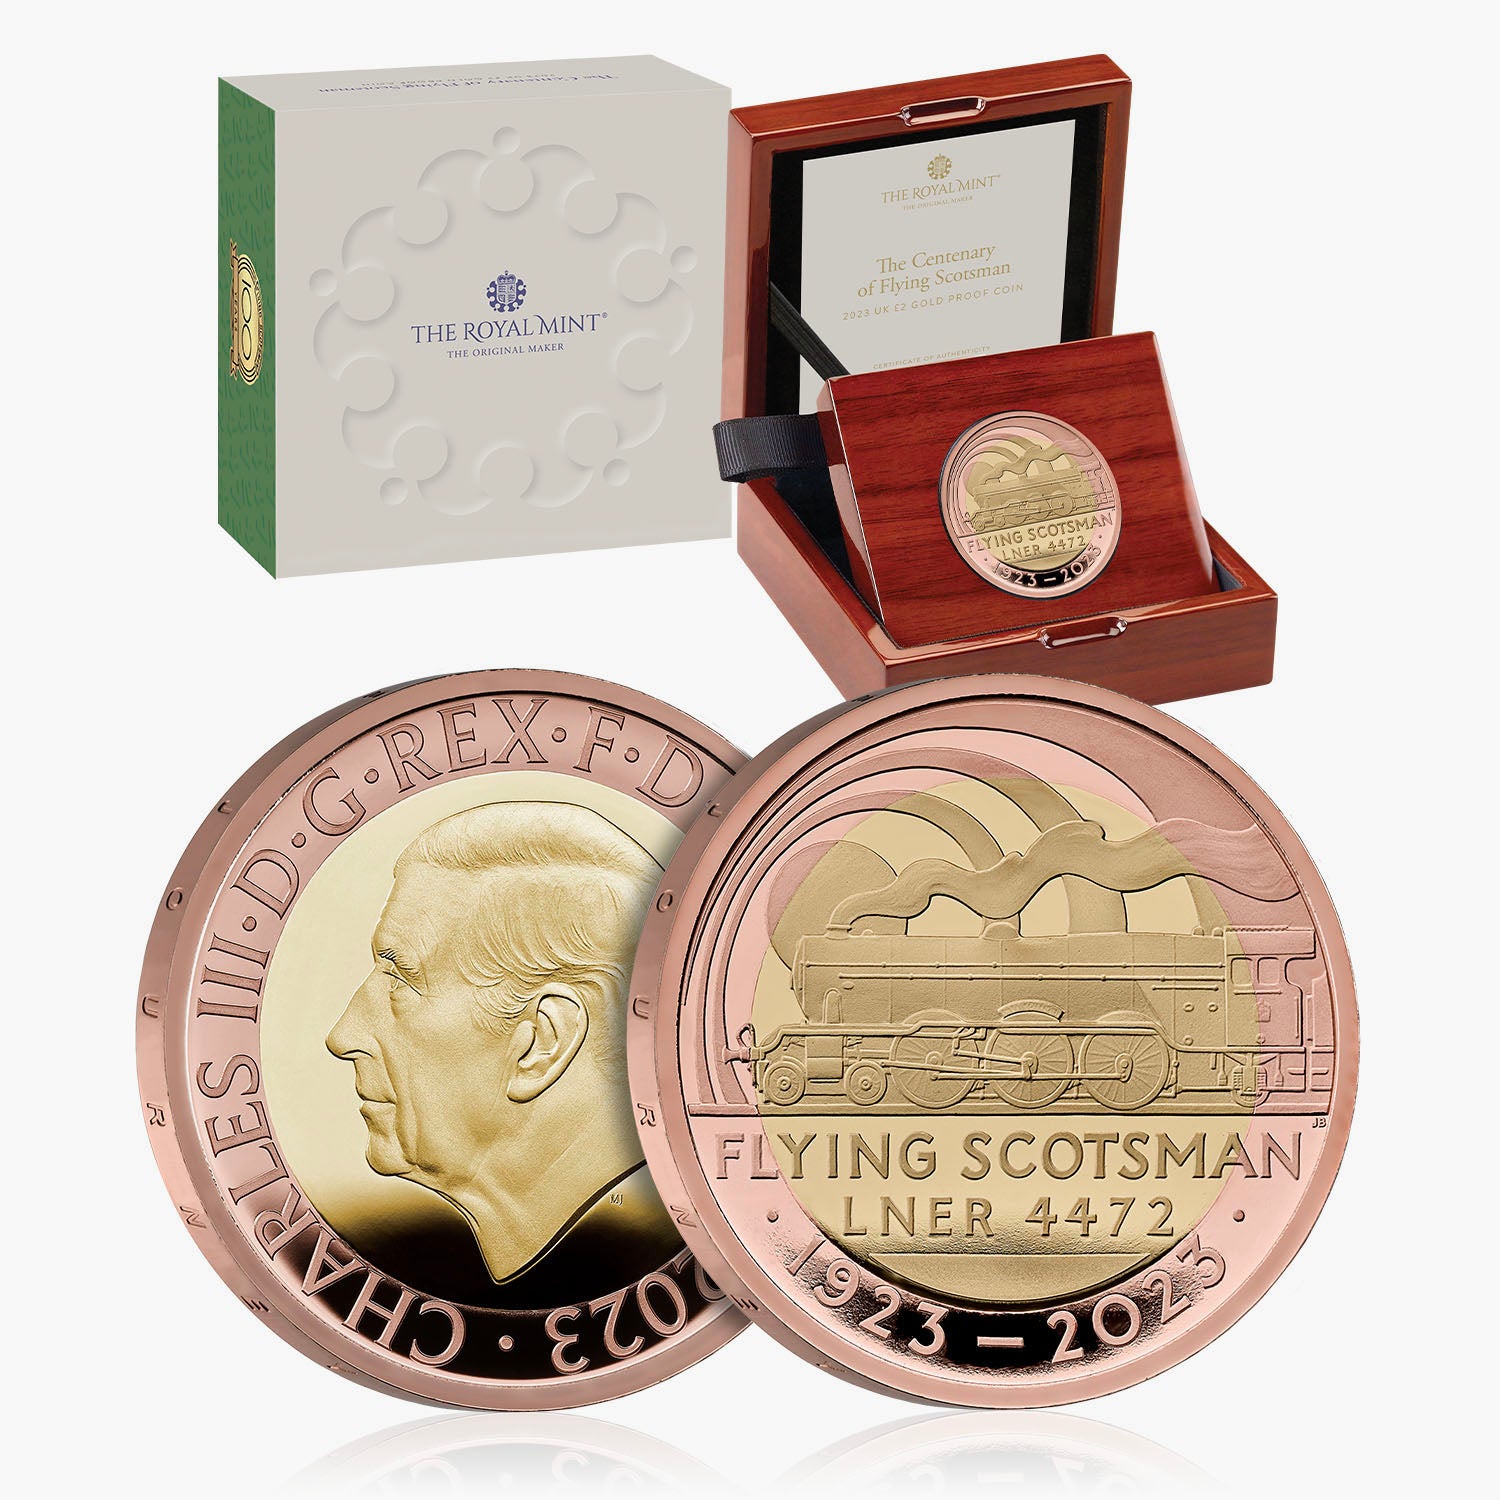 The Centenary of Flying Scotsman 2023 UK £2 Gold Proof Coin